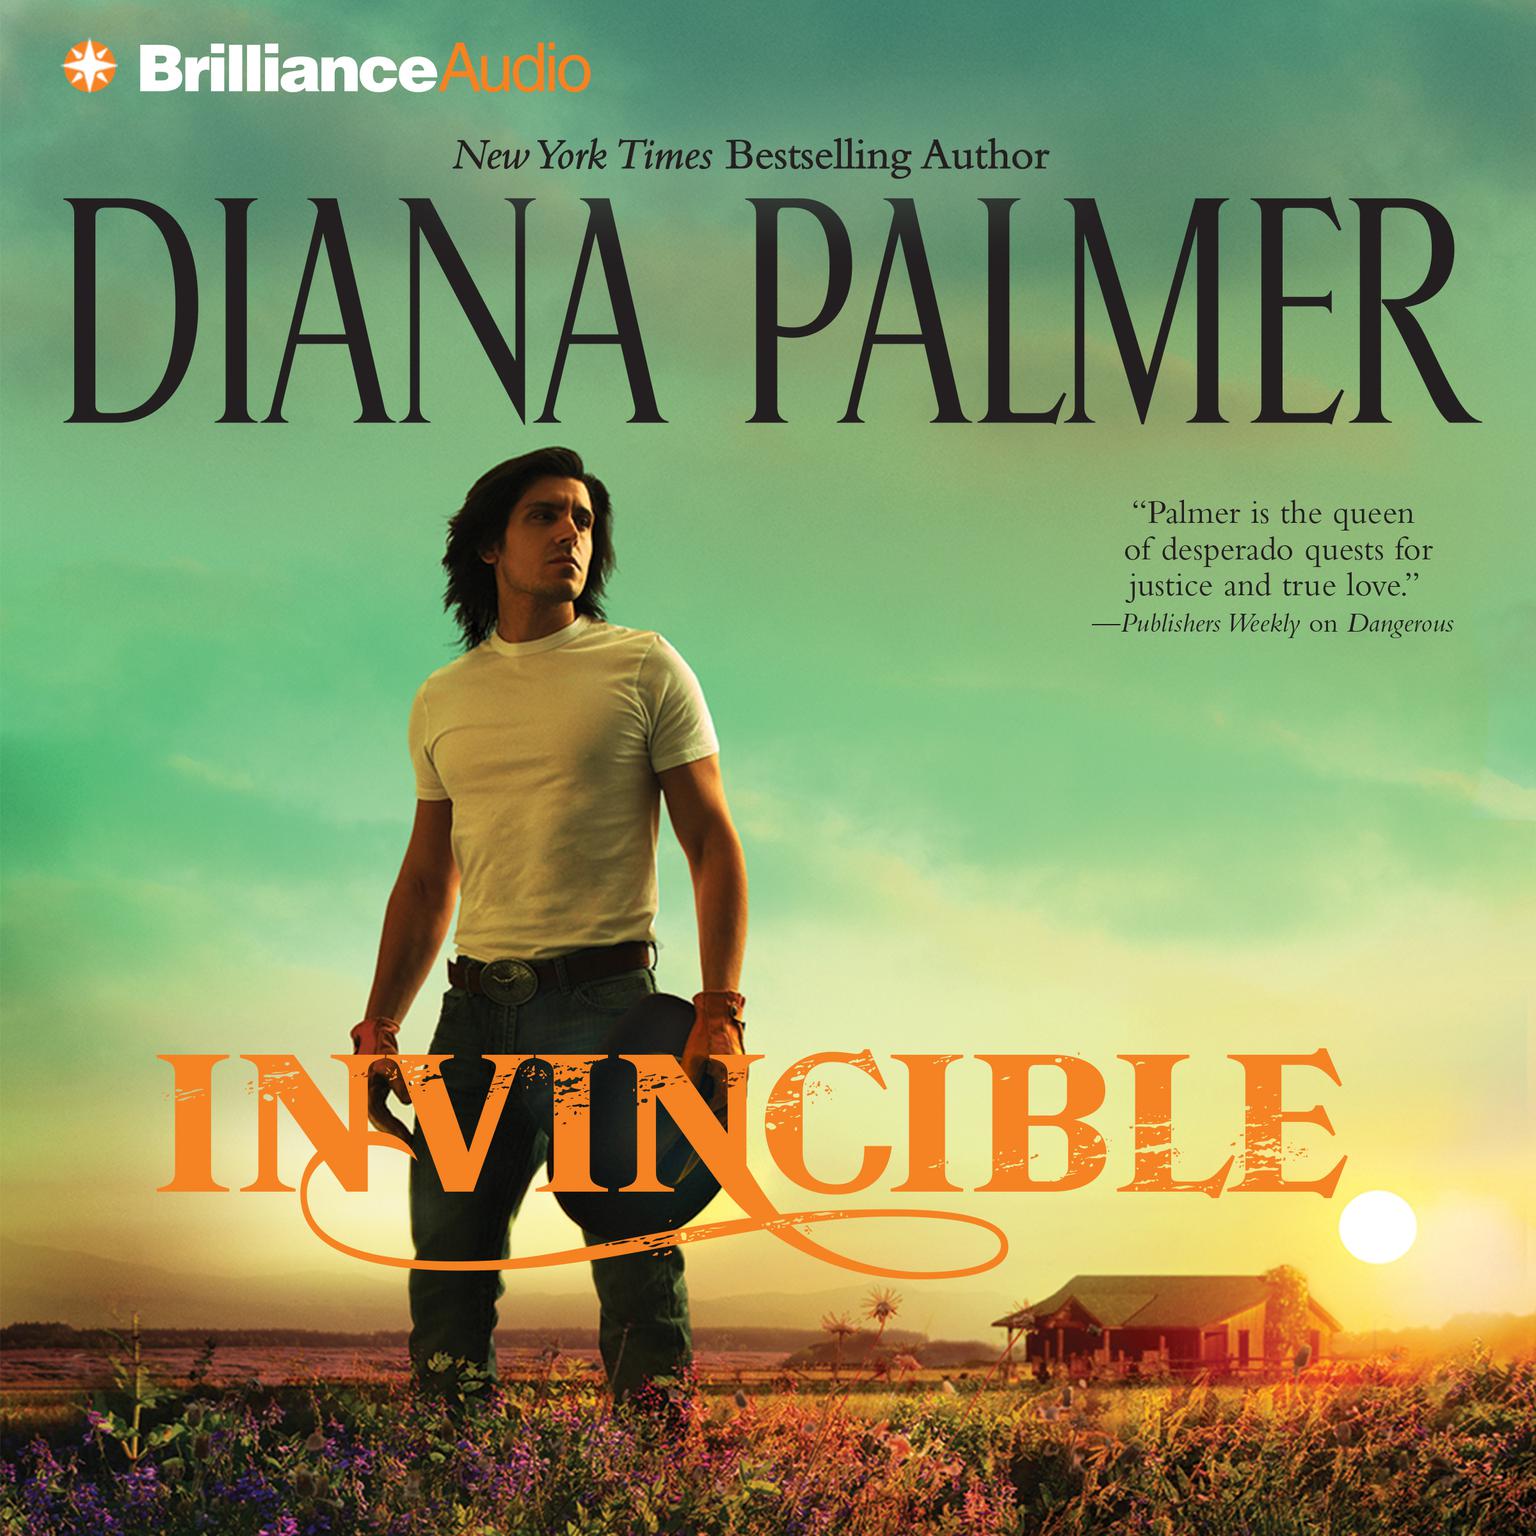 Invincible (Abridged) Audiobook, by Diana Palmer